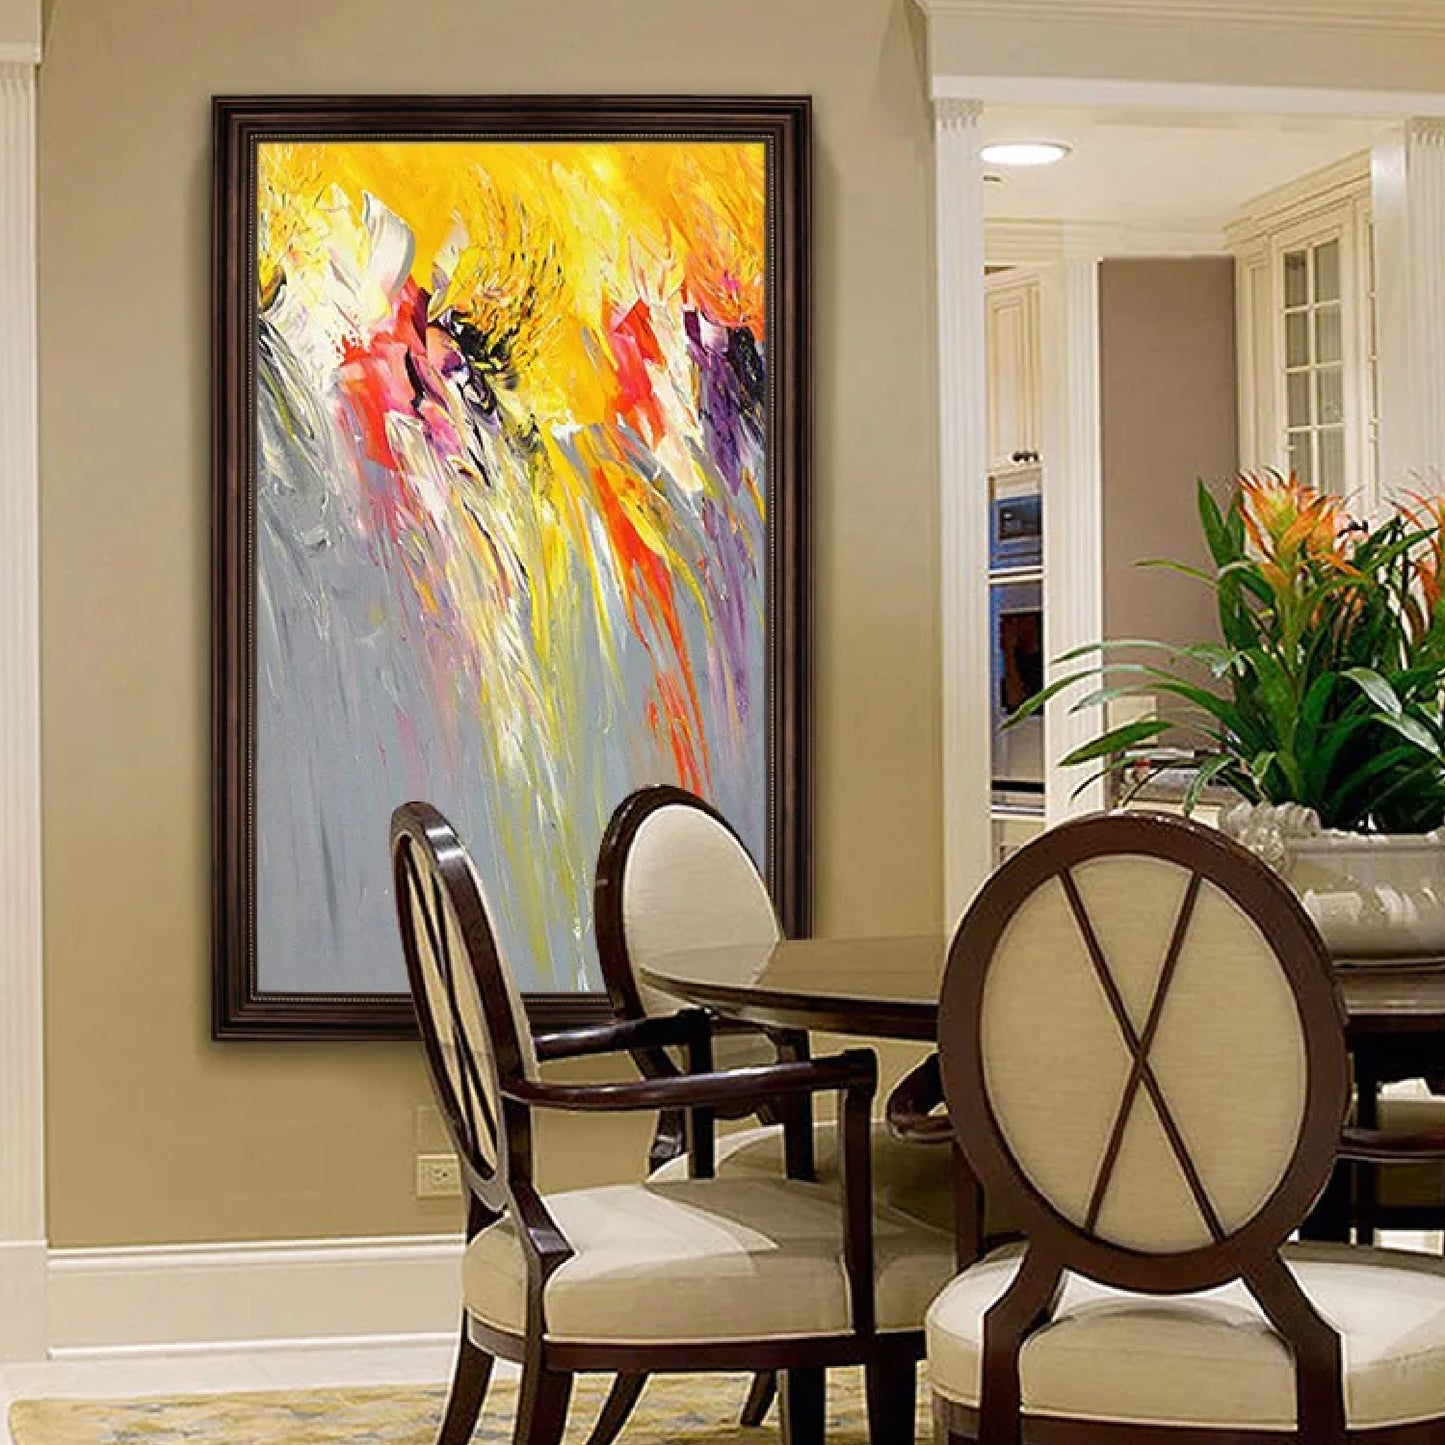 European-Style Yellow Grey Palette Knife Painting